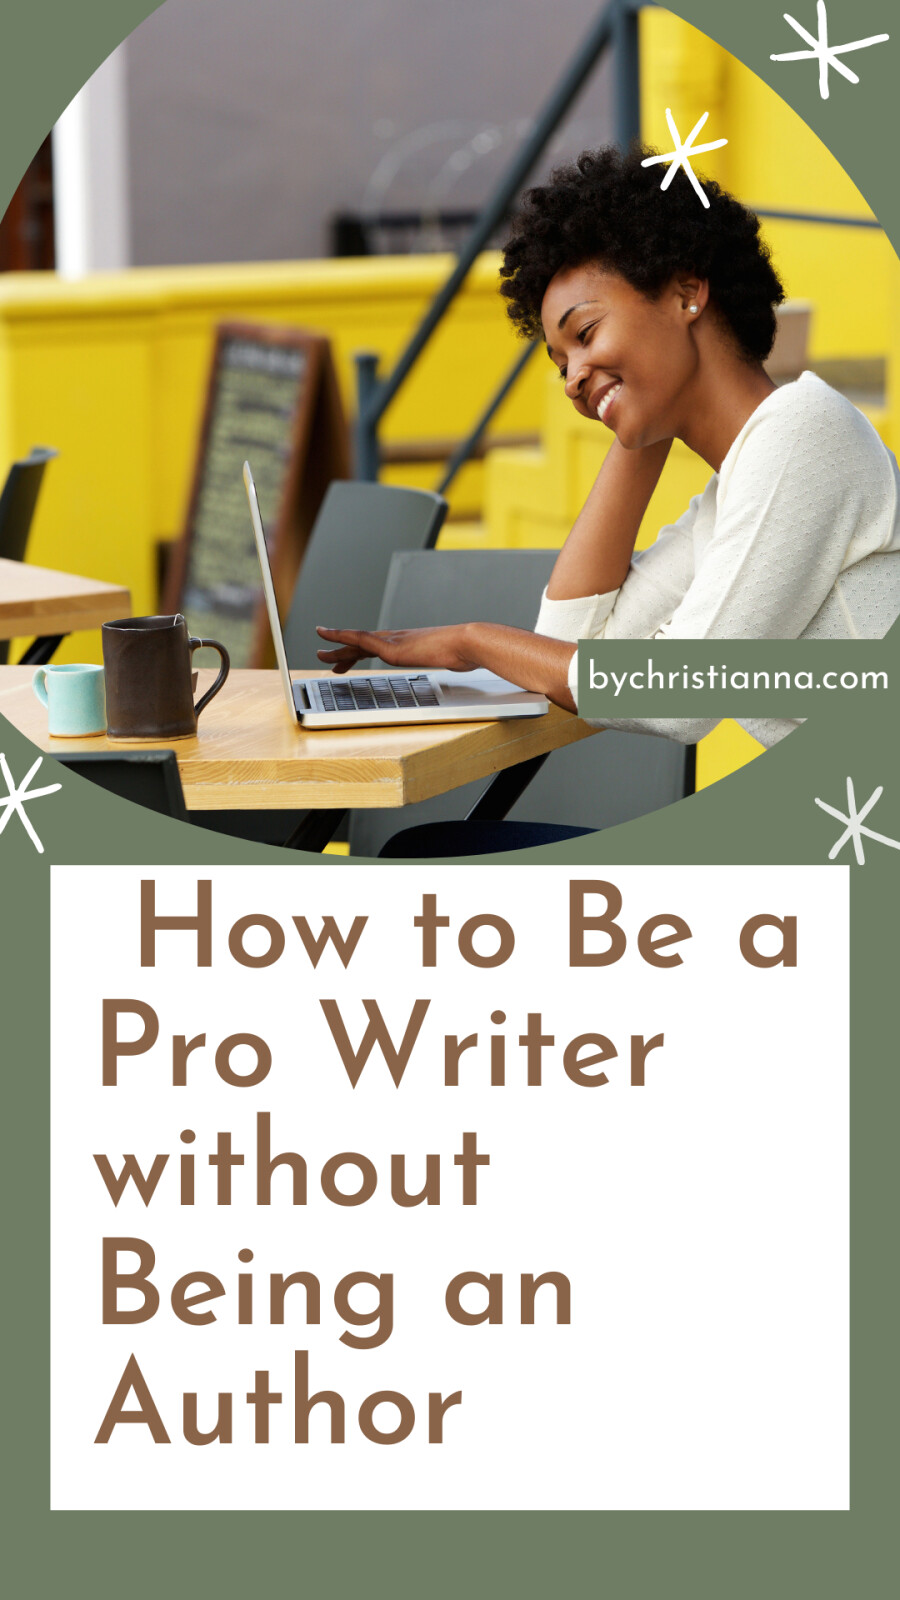 How to Be a Pro Writer without Being an Author